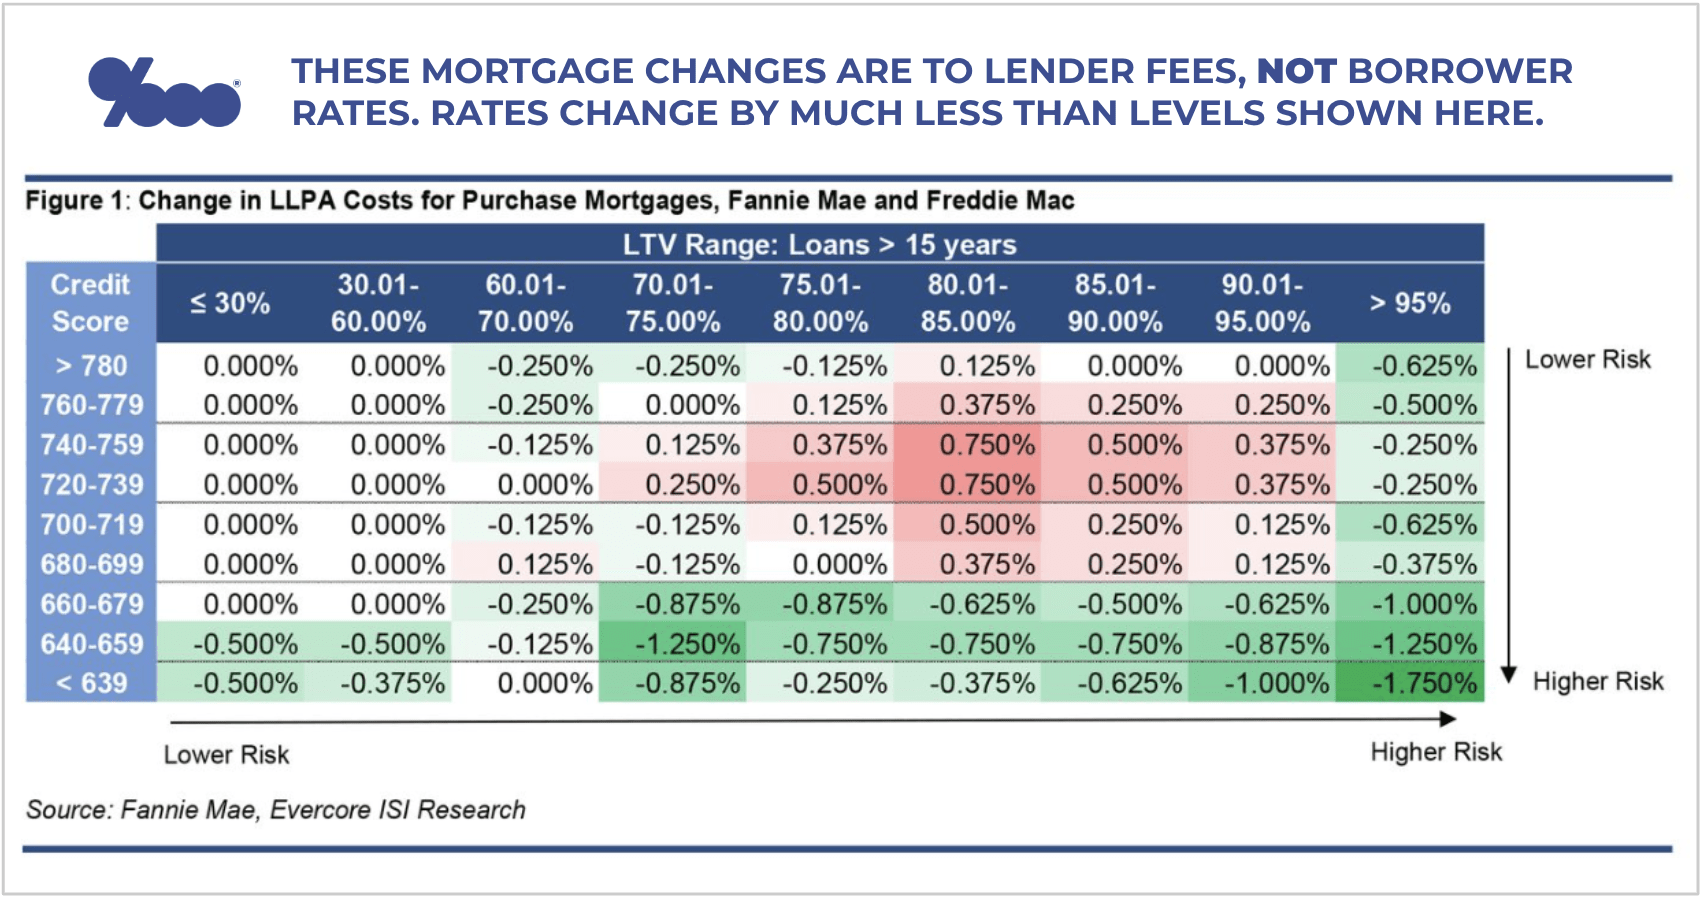 FHFA mortgage fee changes are to lender fees, NOT borrower rates. Rates change by much less than levels shown here. - The Basis Point